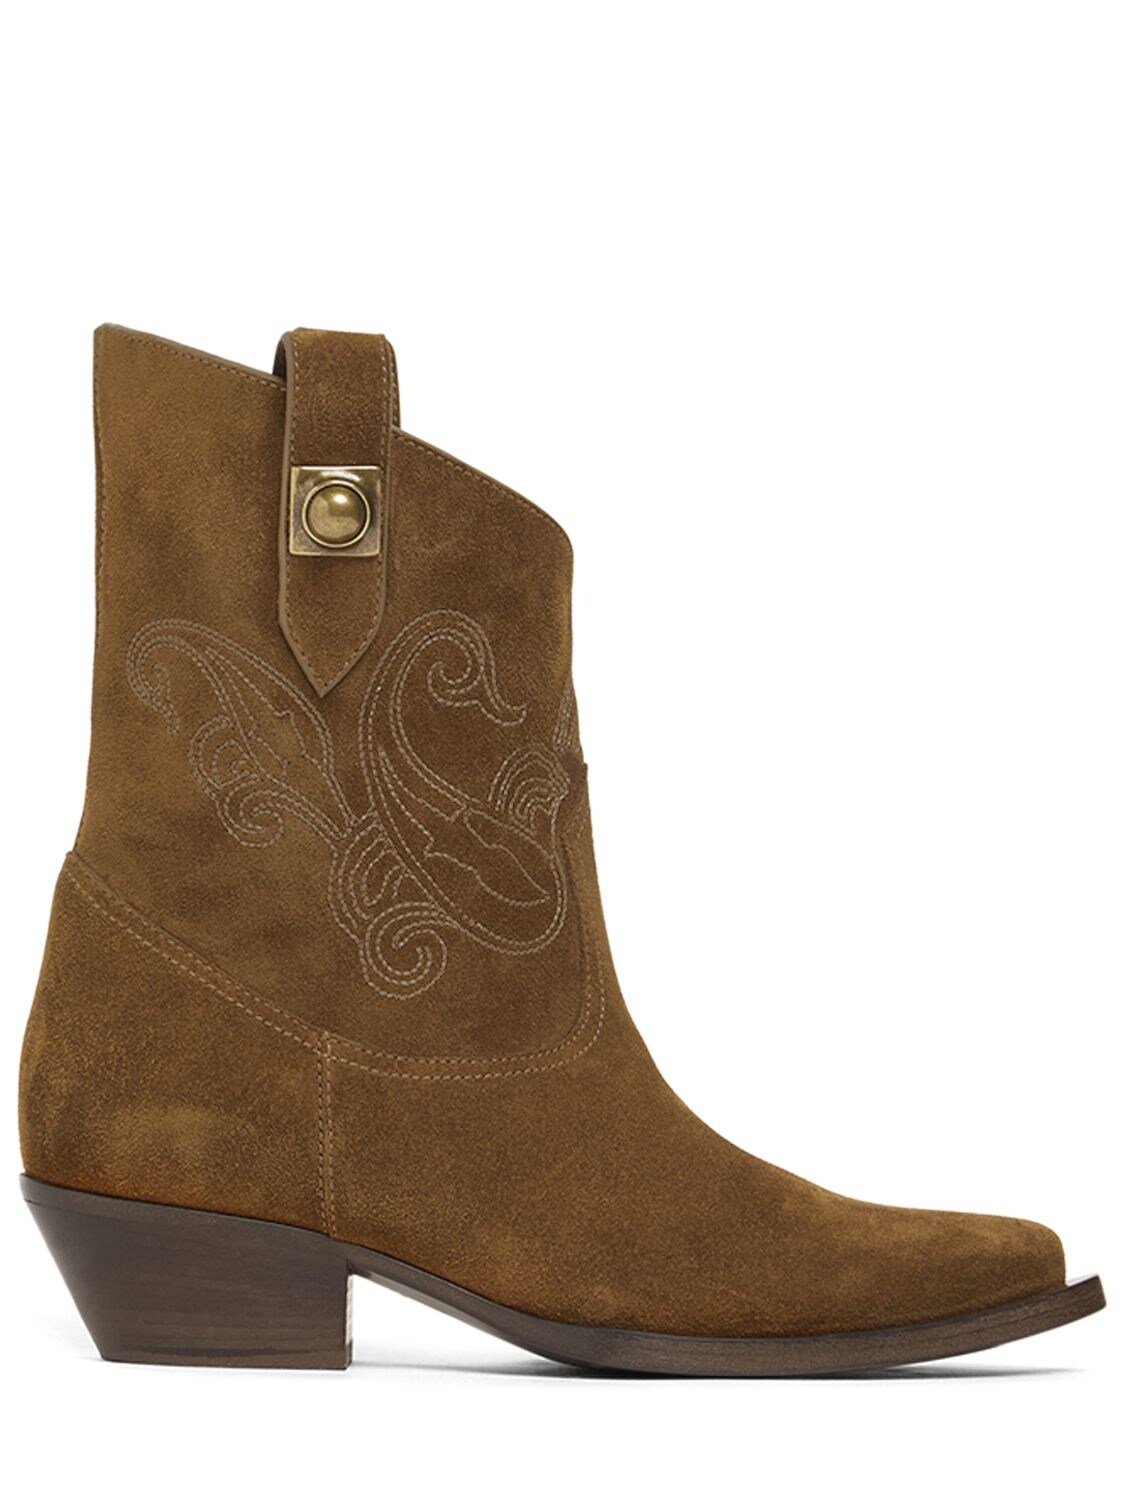 40mm Western Suede Ankle Boots